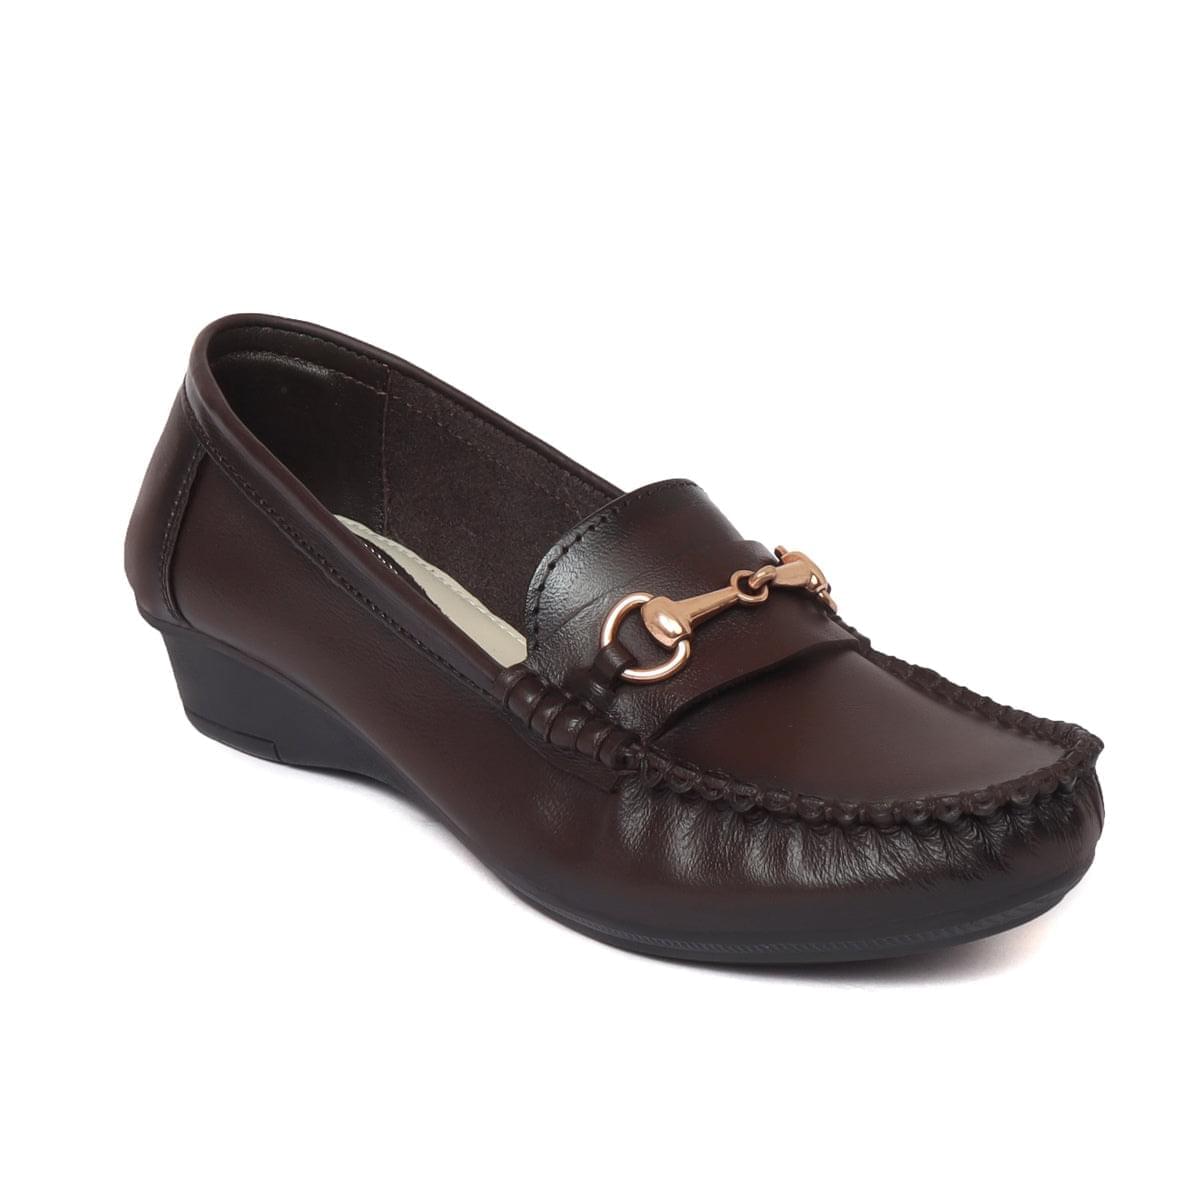 loafer formal shoes for women brown